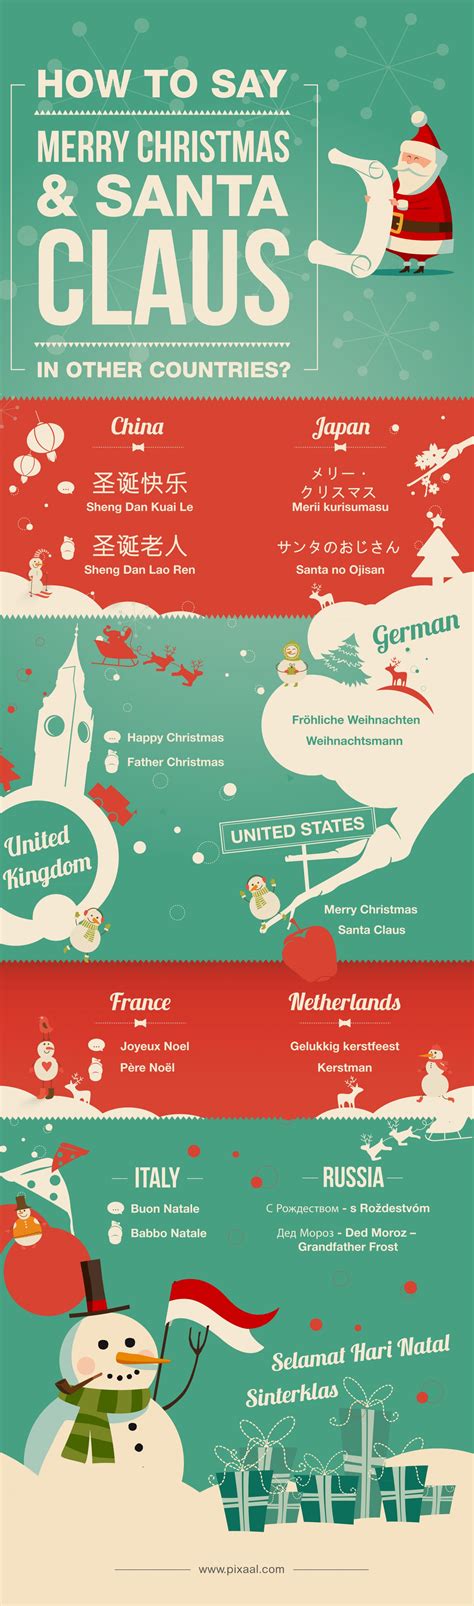 9 Christmas Infographic Design Ideas Examples And Templates Daily